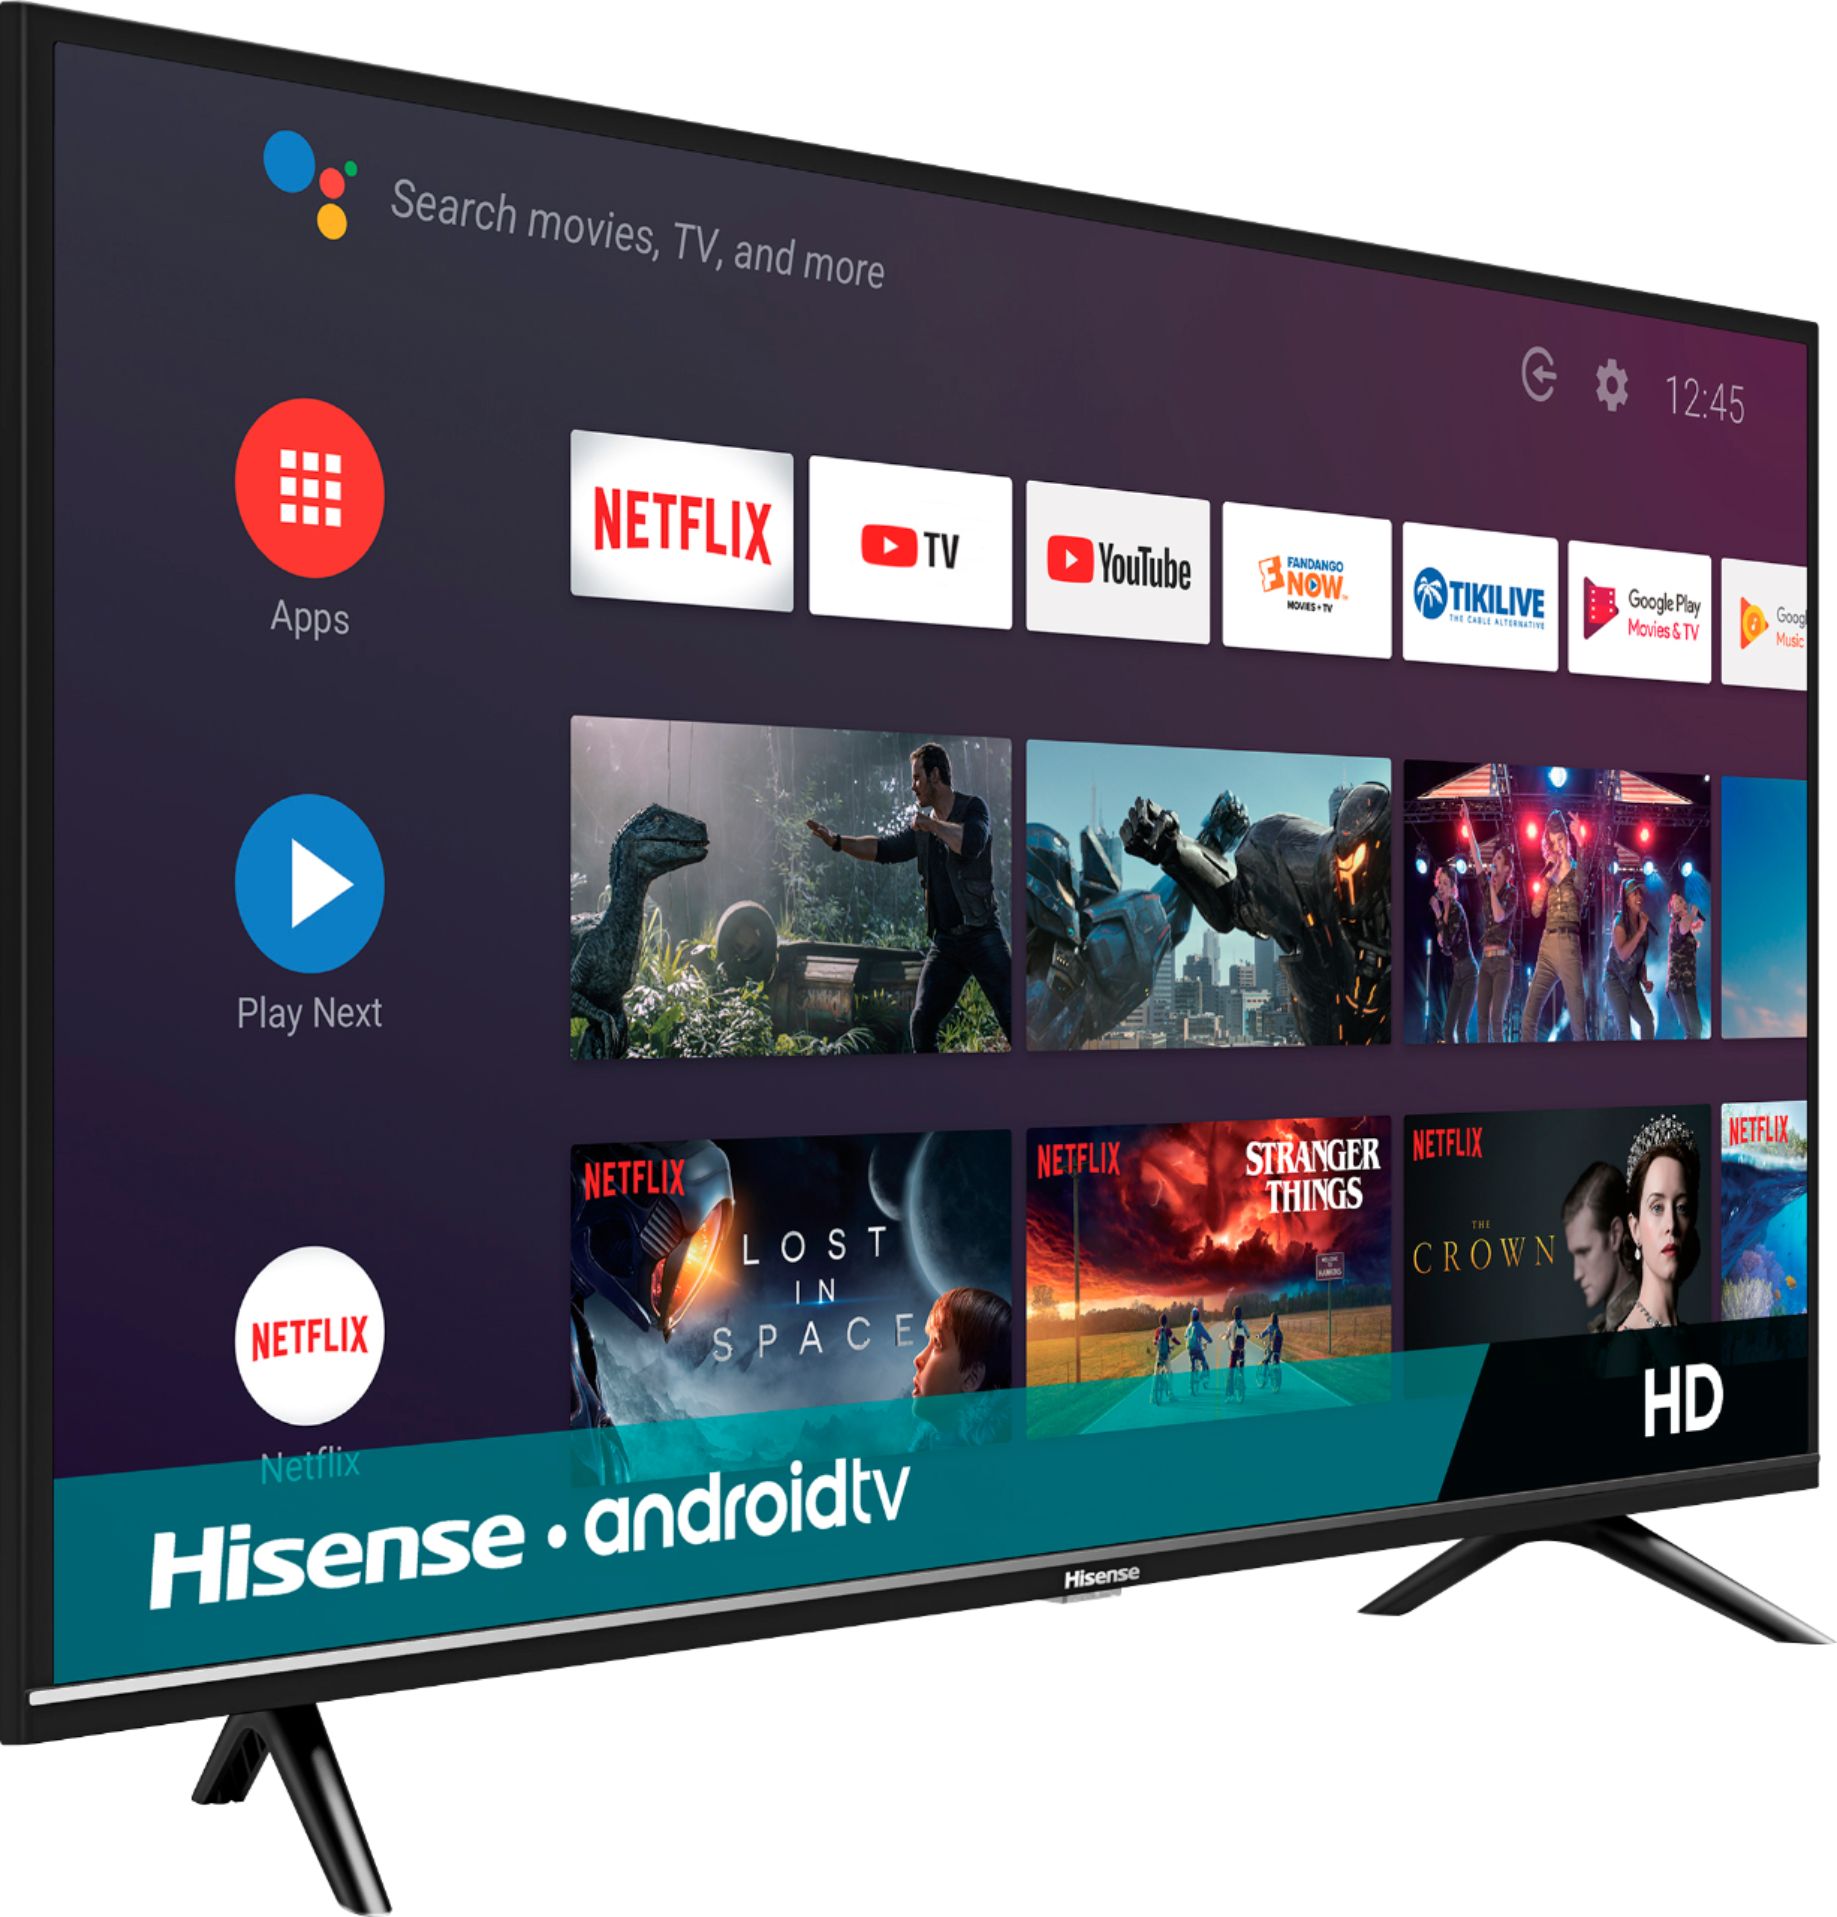 Can I Download The Disney Plus App On My Hisense Smart Tv - The